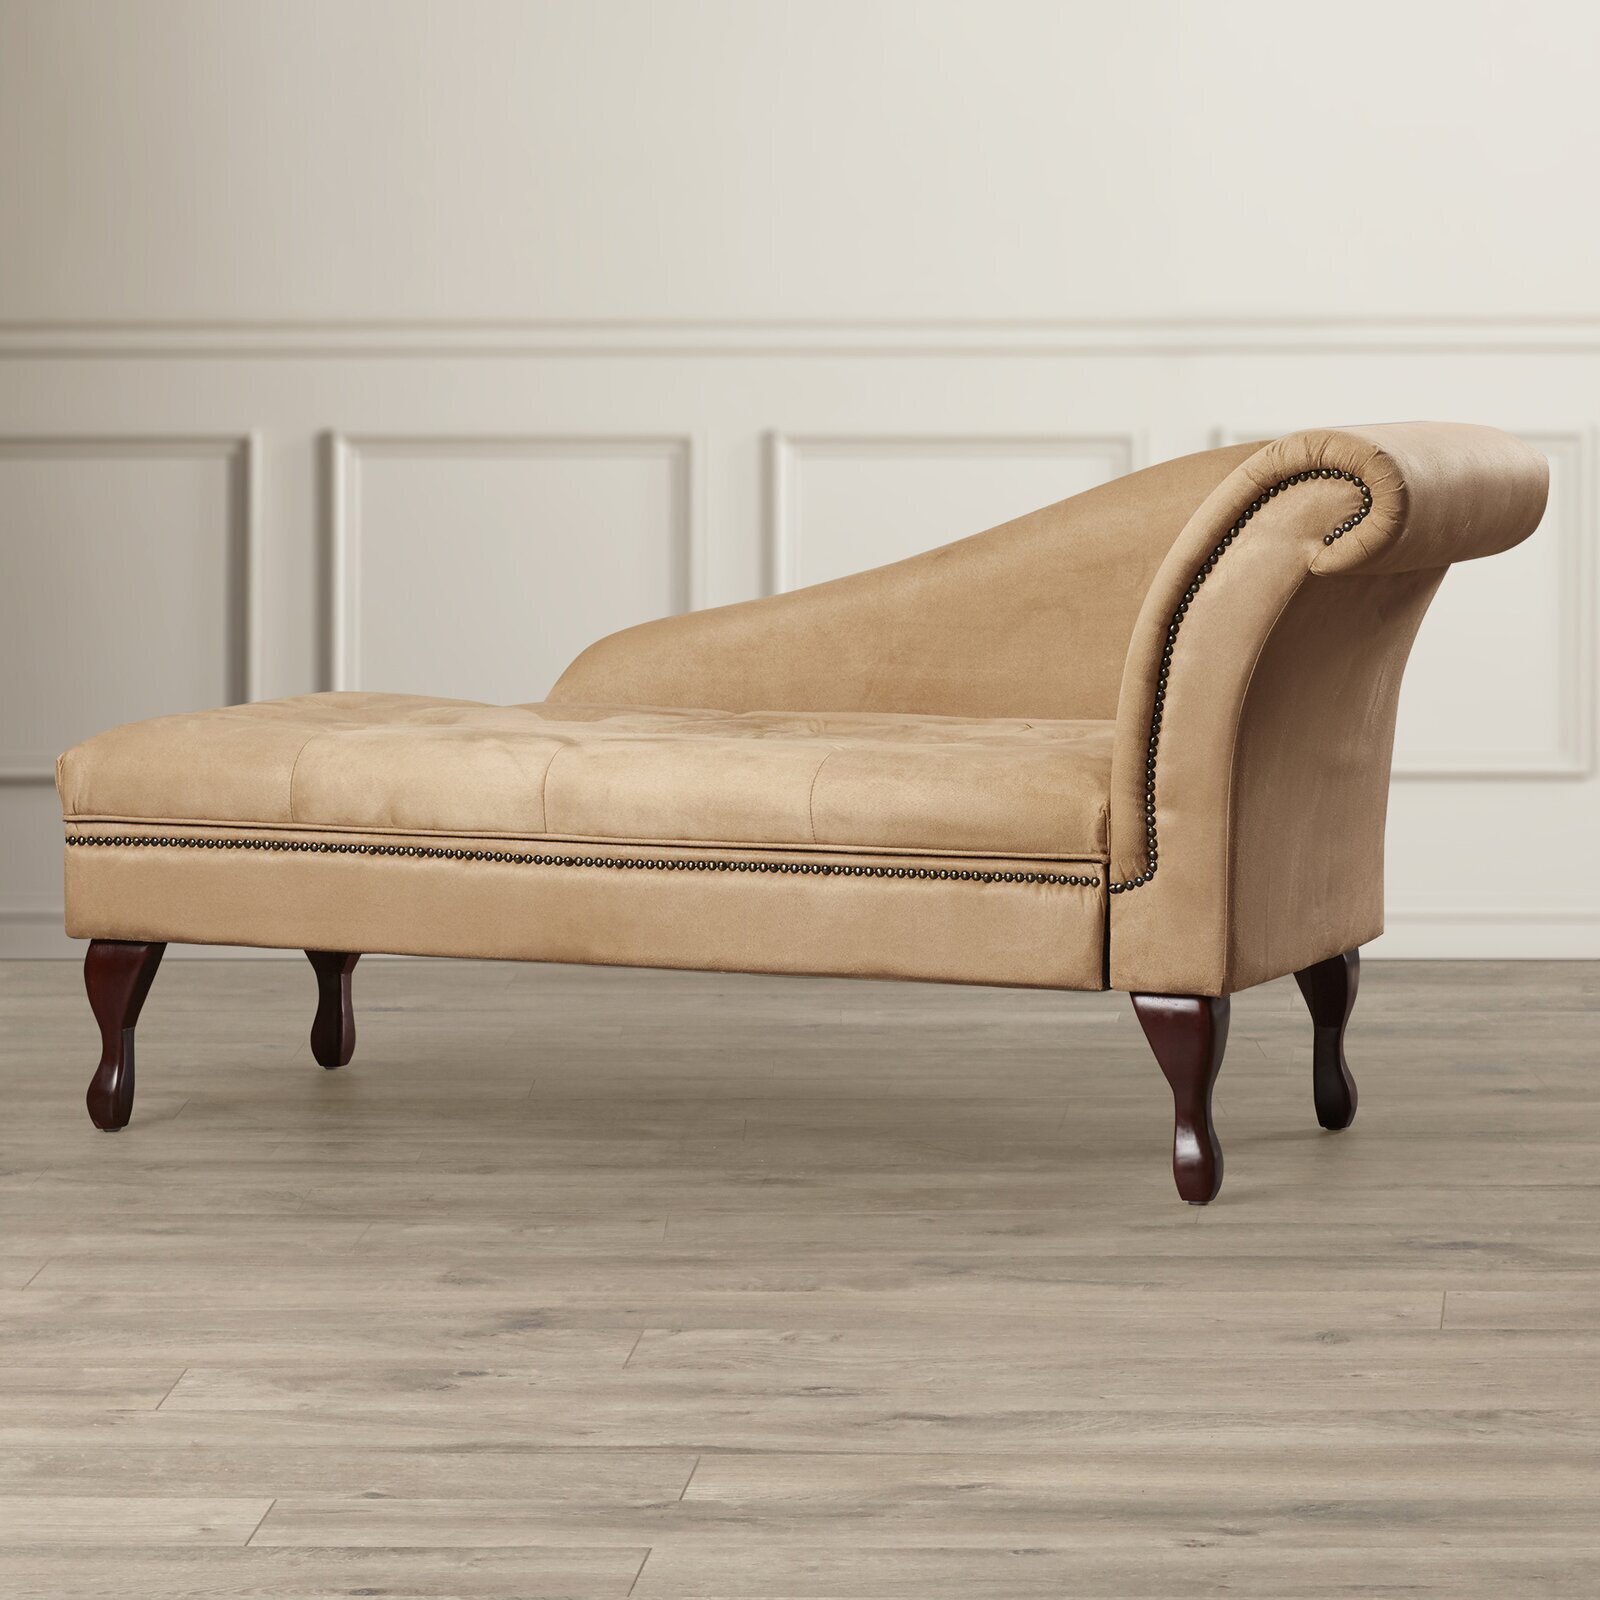 Traditional Style Chaise Lounge Right Arm Facing